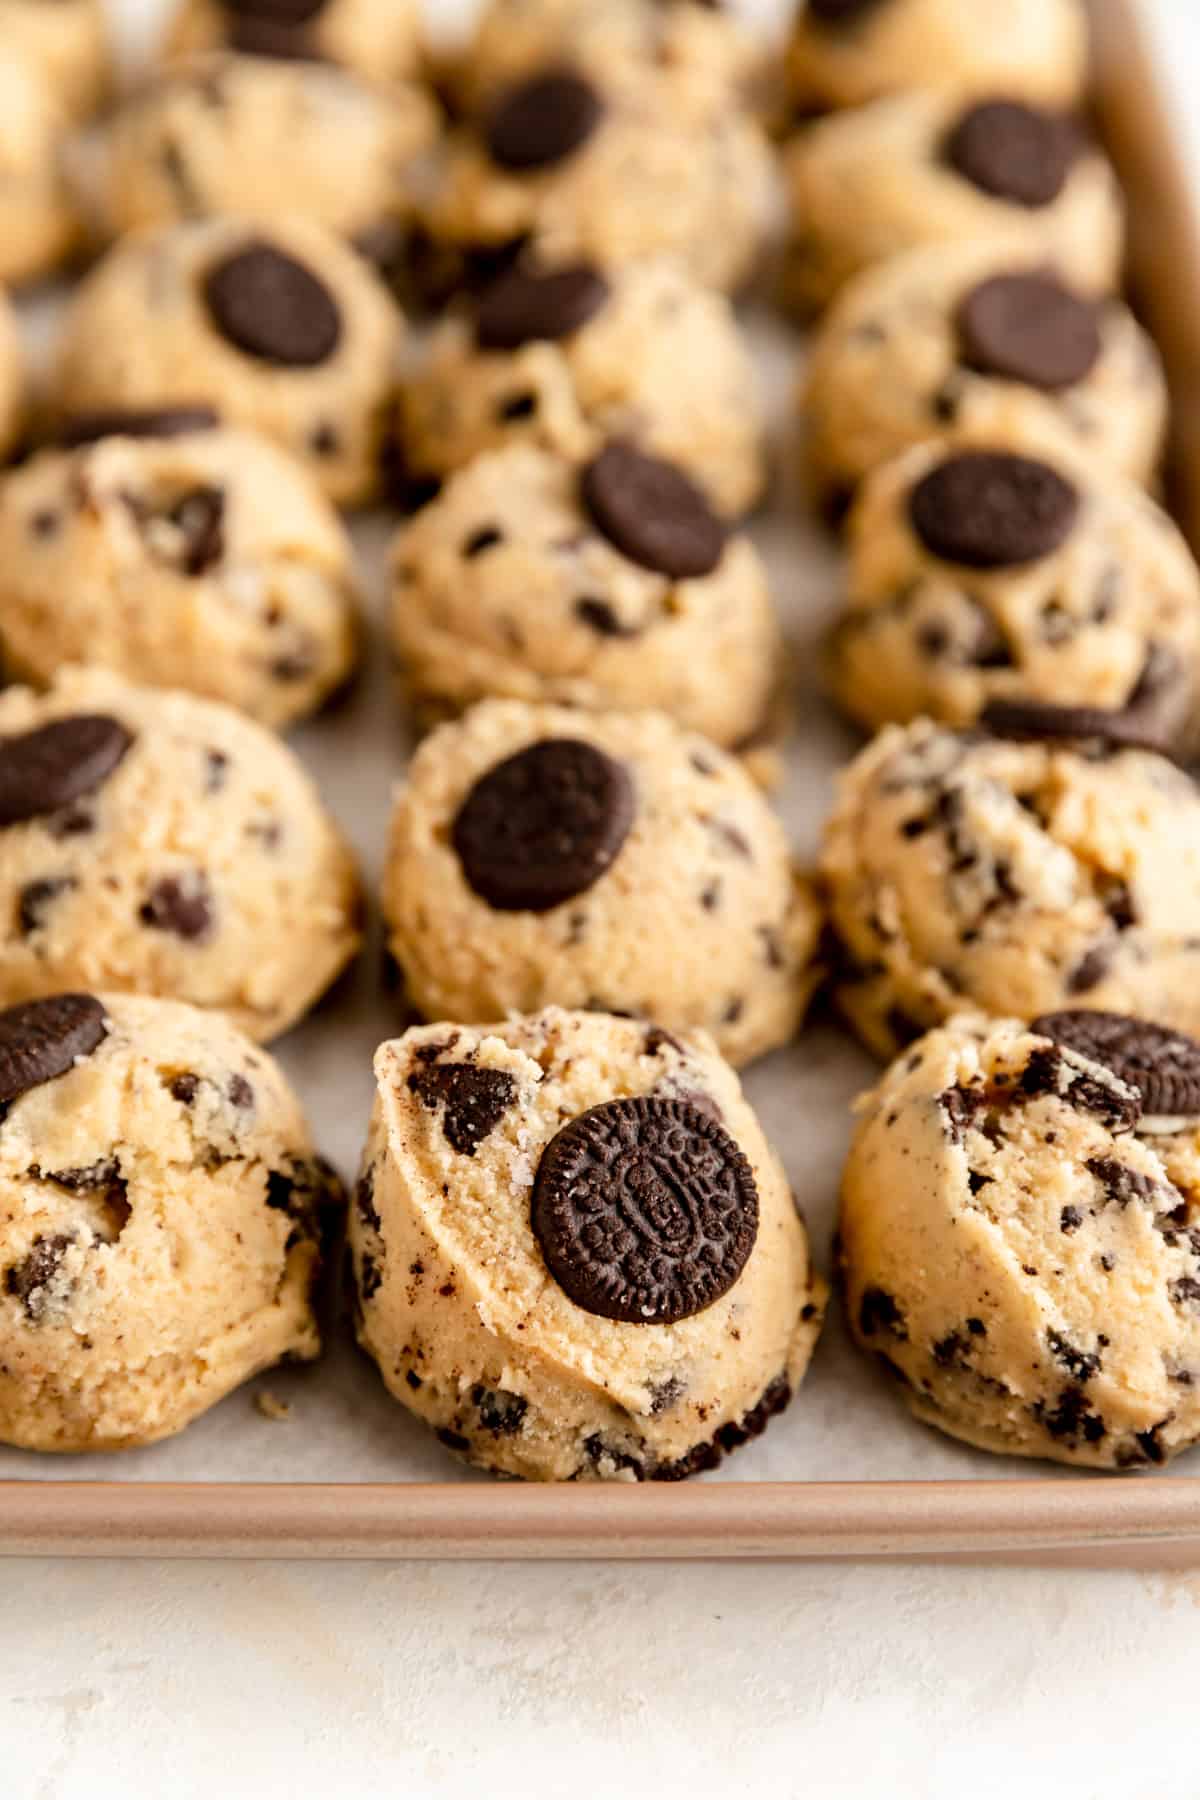 oreo chocolate chip cookie dough balls lined up on a tan baking sheet.